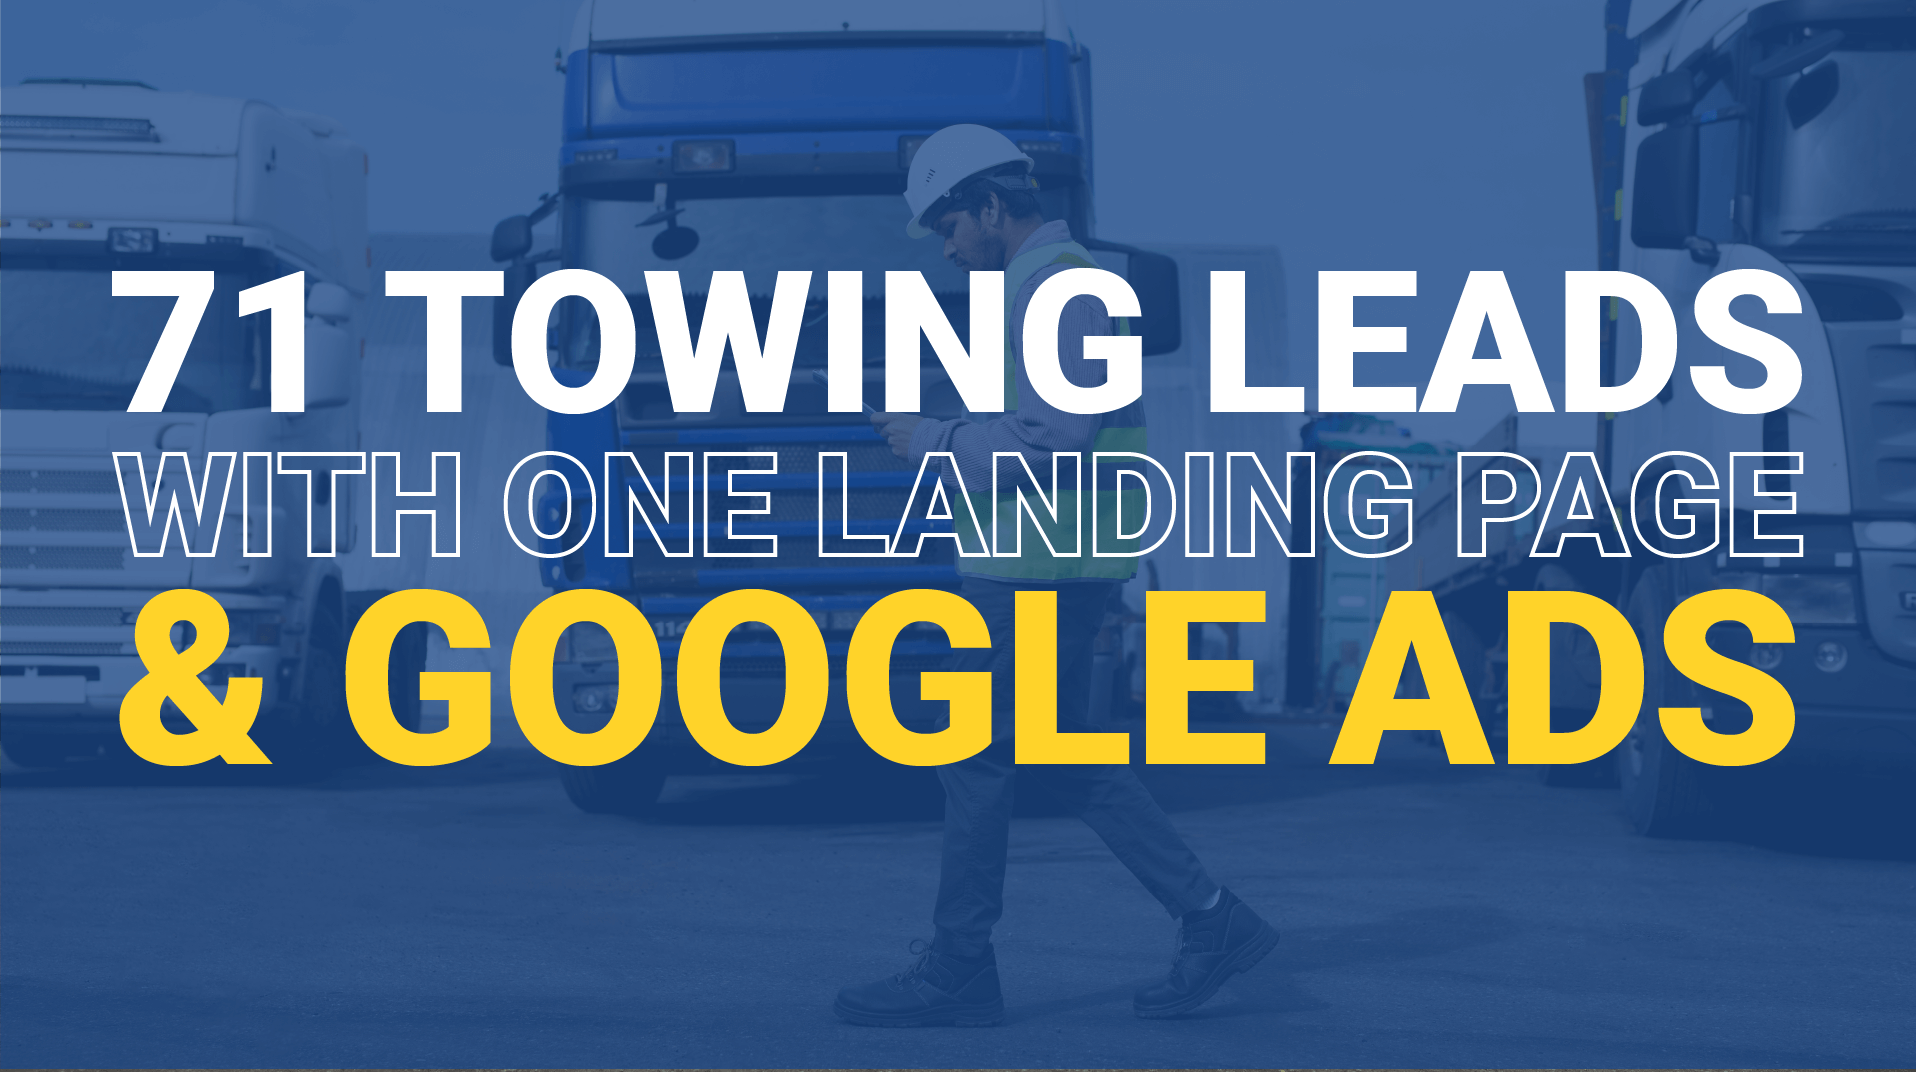 71 Towing Leads With One Landing Page & Google Ads